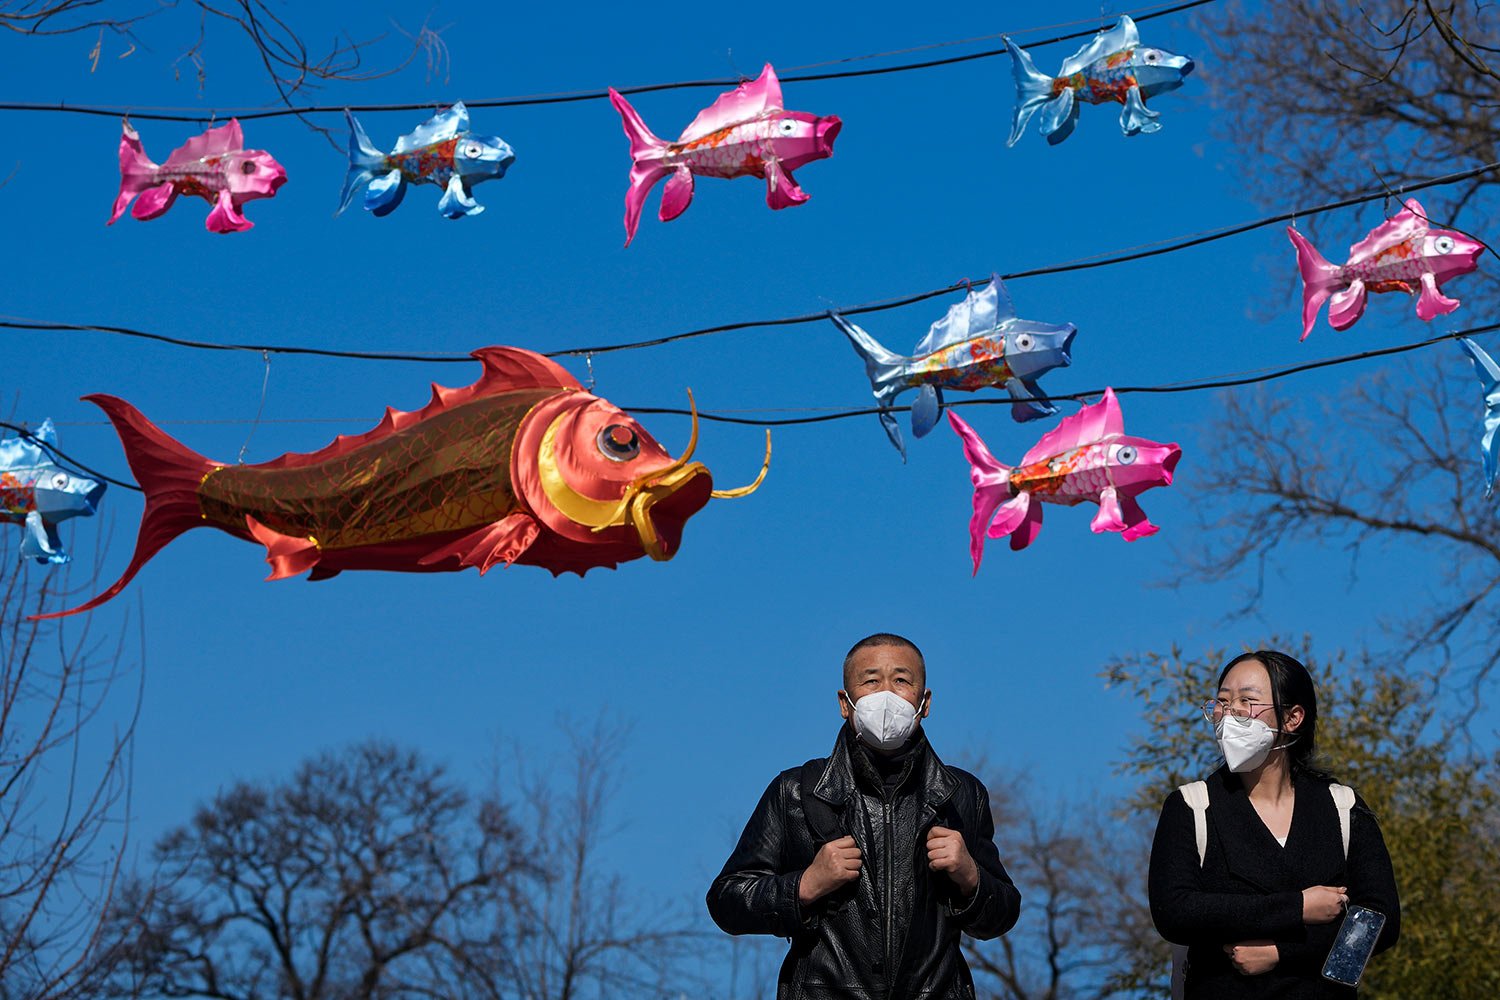  People wearing face masks walk under fish shaped lanterns on display in a green space in Beijing, Monday, Feb. 20, 2023. (AP Photo/Andy Wong) 